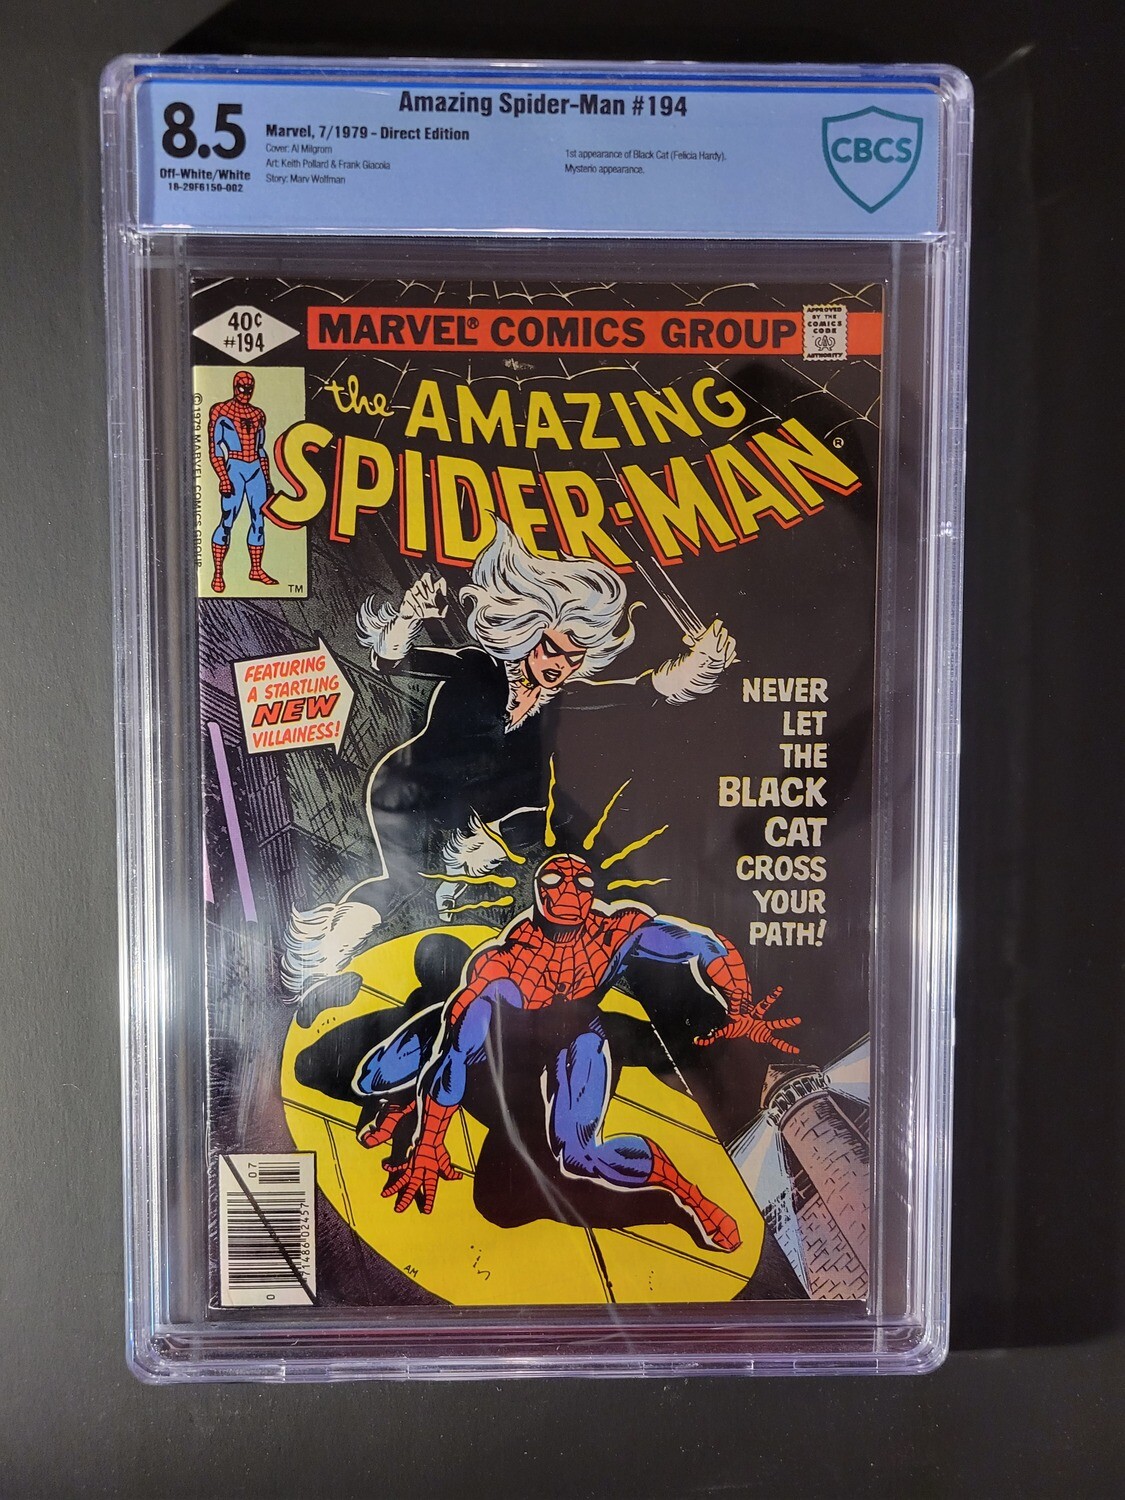 Amazing Spider-Man #194 CBCS 8.5 1st appearance of Black Cat